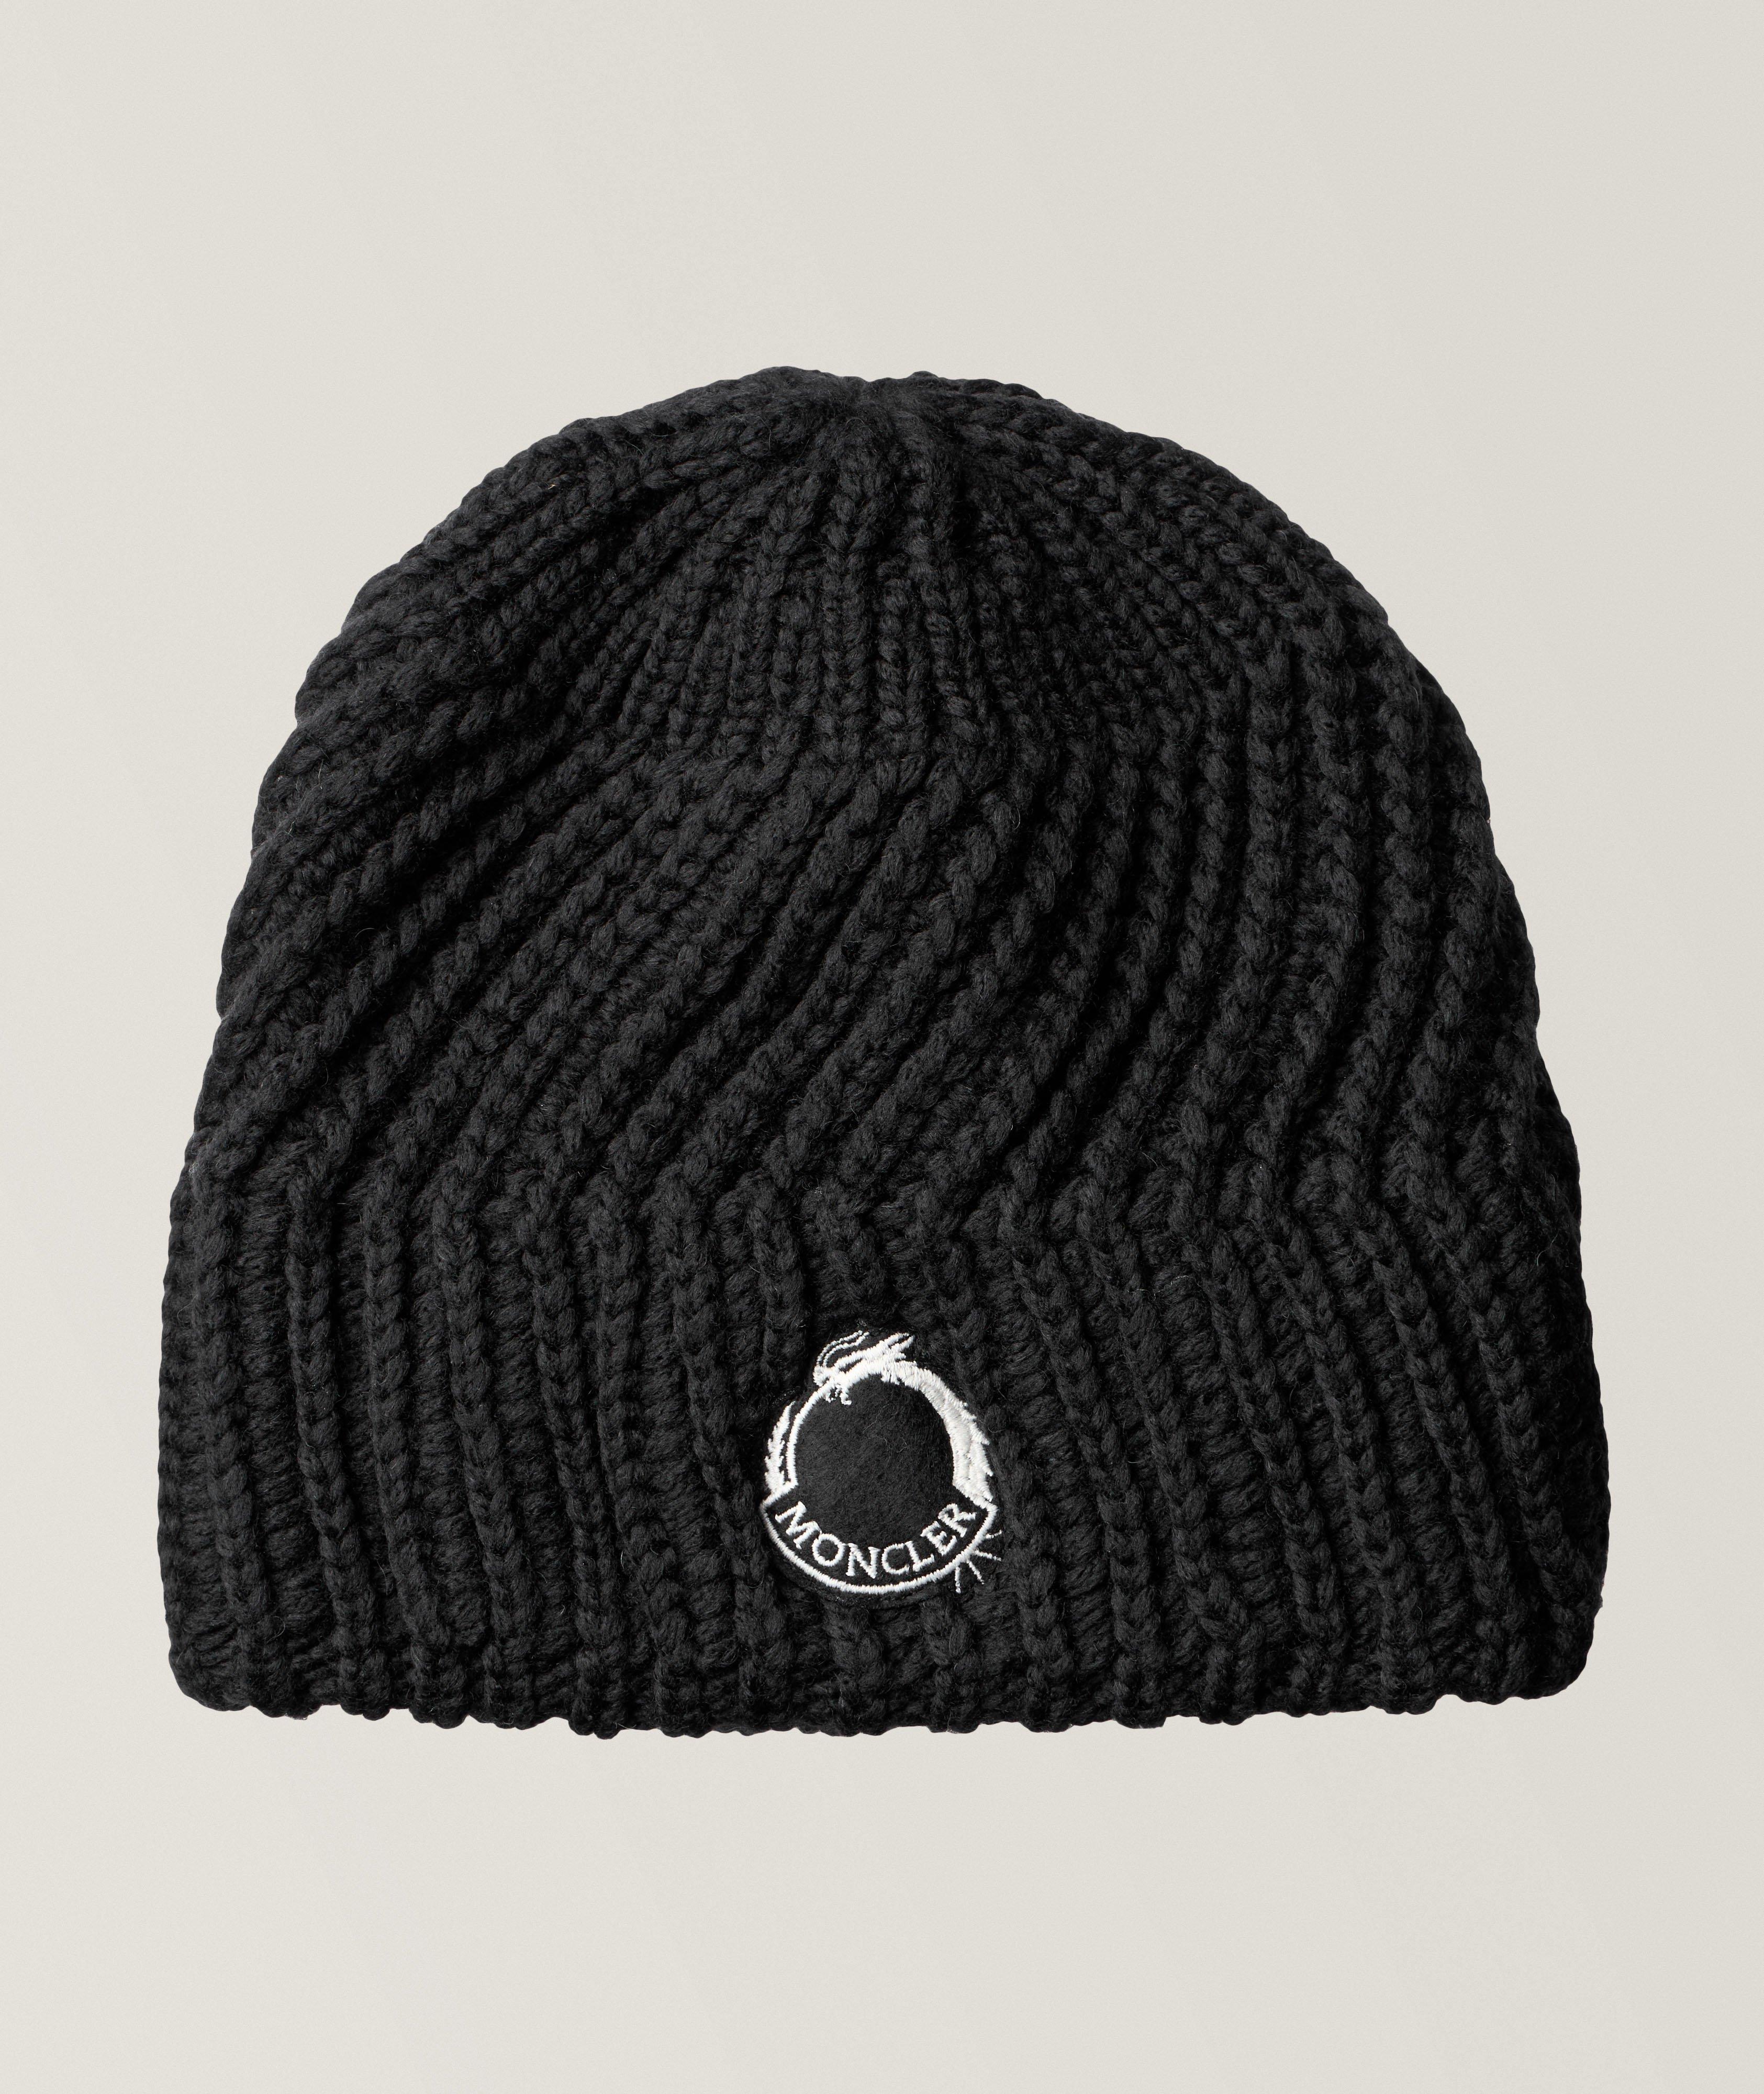 Year of The Dragon Collection Virgin Wool-Blend Ribbed Beanie image 0